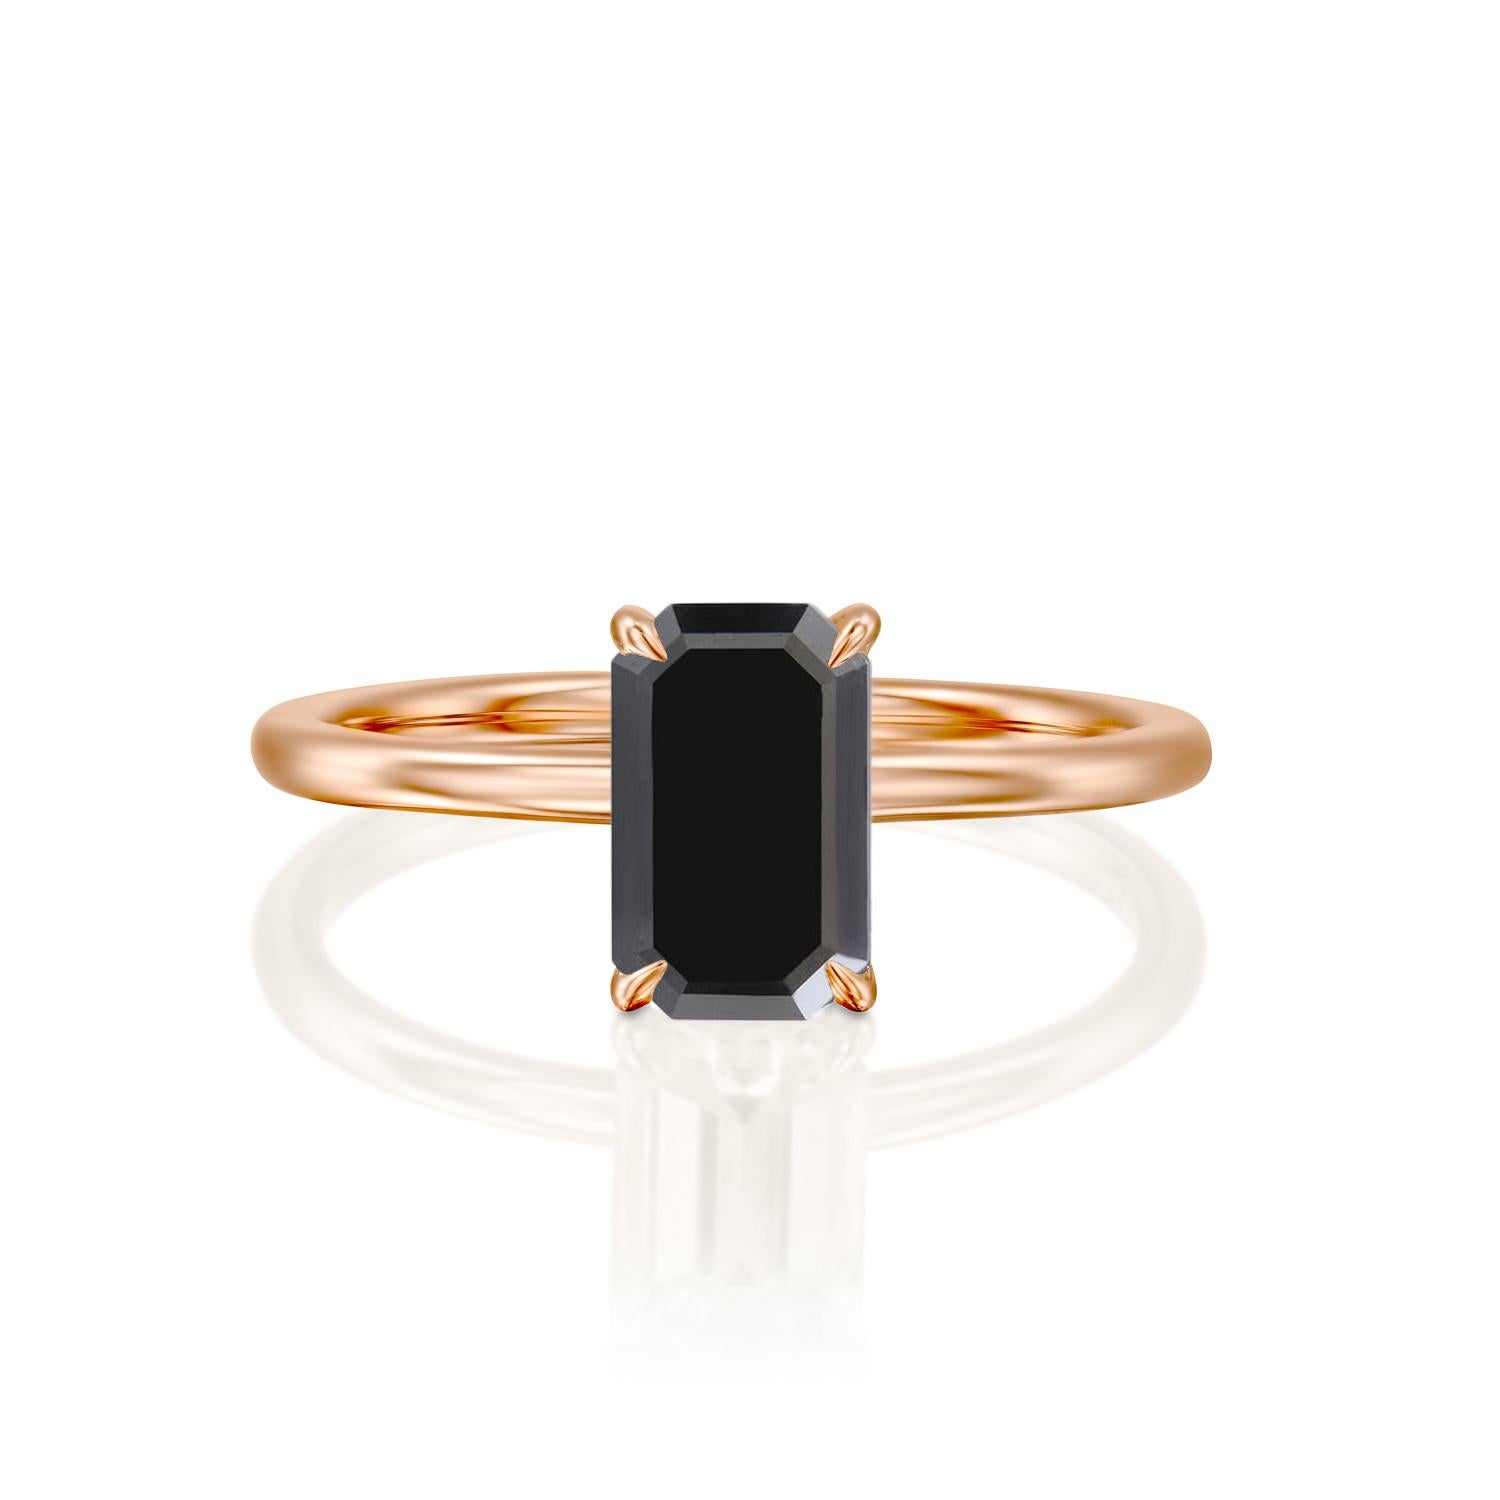 Beautiful minimalistic black diamond engagement ring ring. Center stone is of 1 carat, natural, emerald shaped, AAA quality Black diamond. Set in a sleek, 14K rose gold, solitaire ring with a 4-prong setting. The setting looks delicate but is